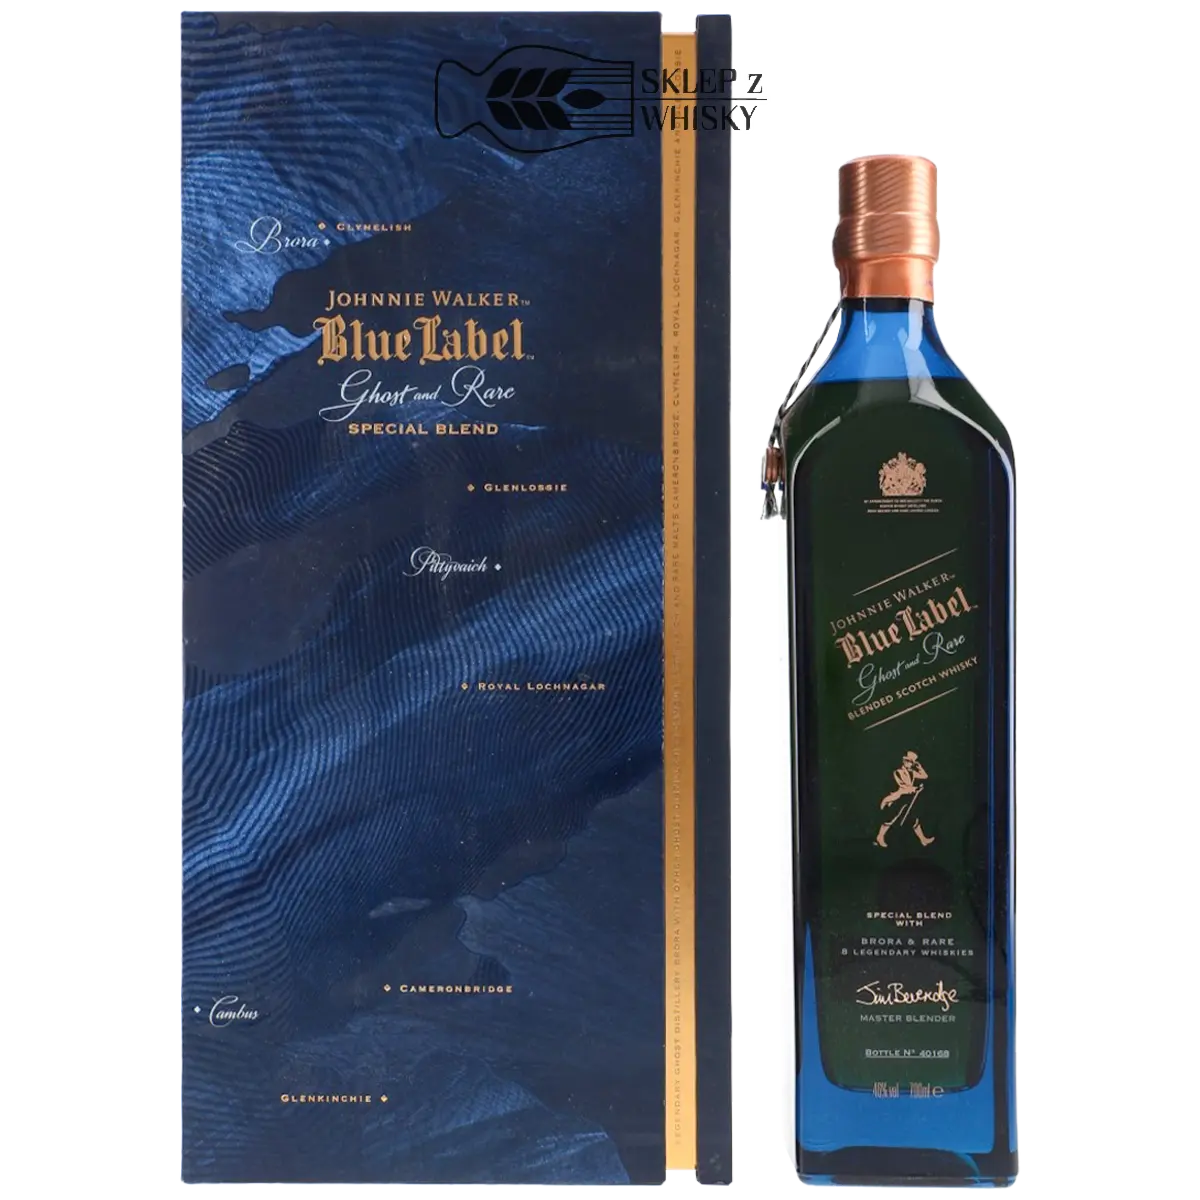 Johnnie Walker Blue Label Ghost And Rare Brora - szkocka whisky blended, 700 ml, w pudełku